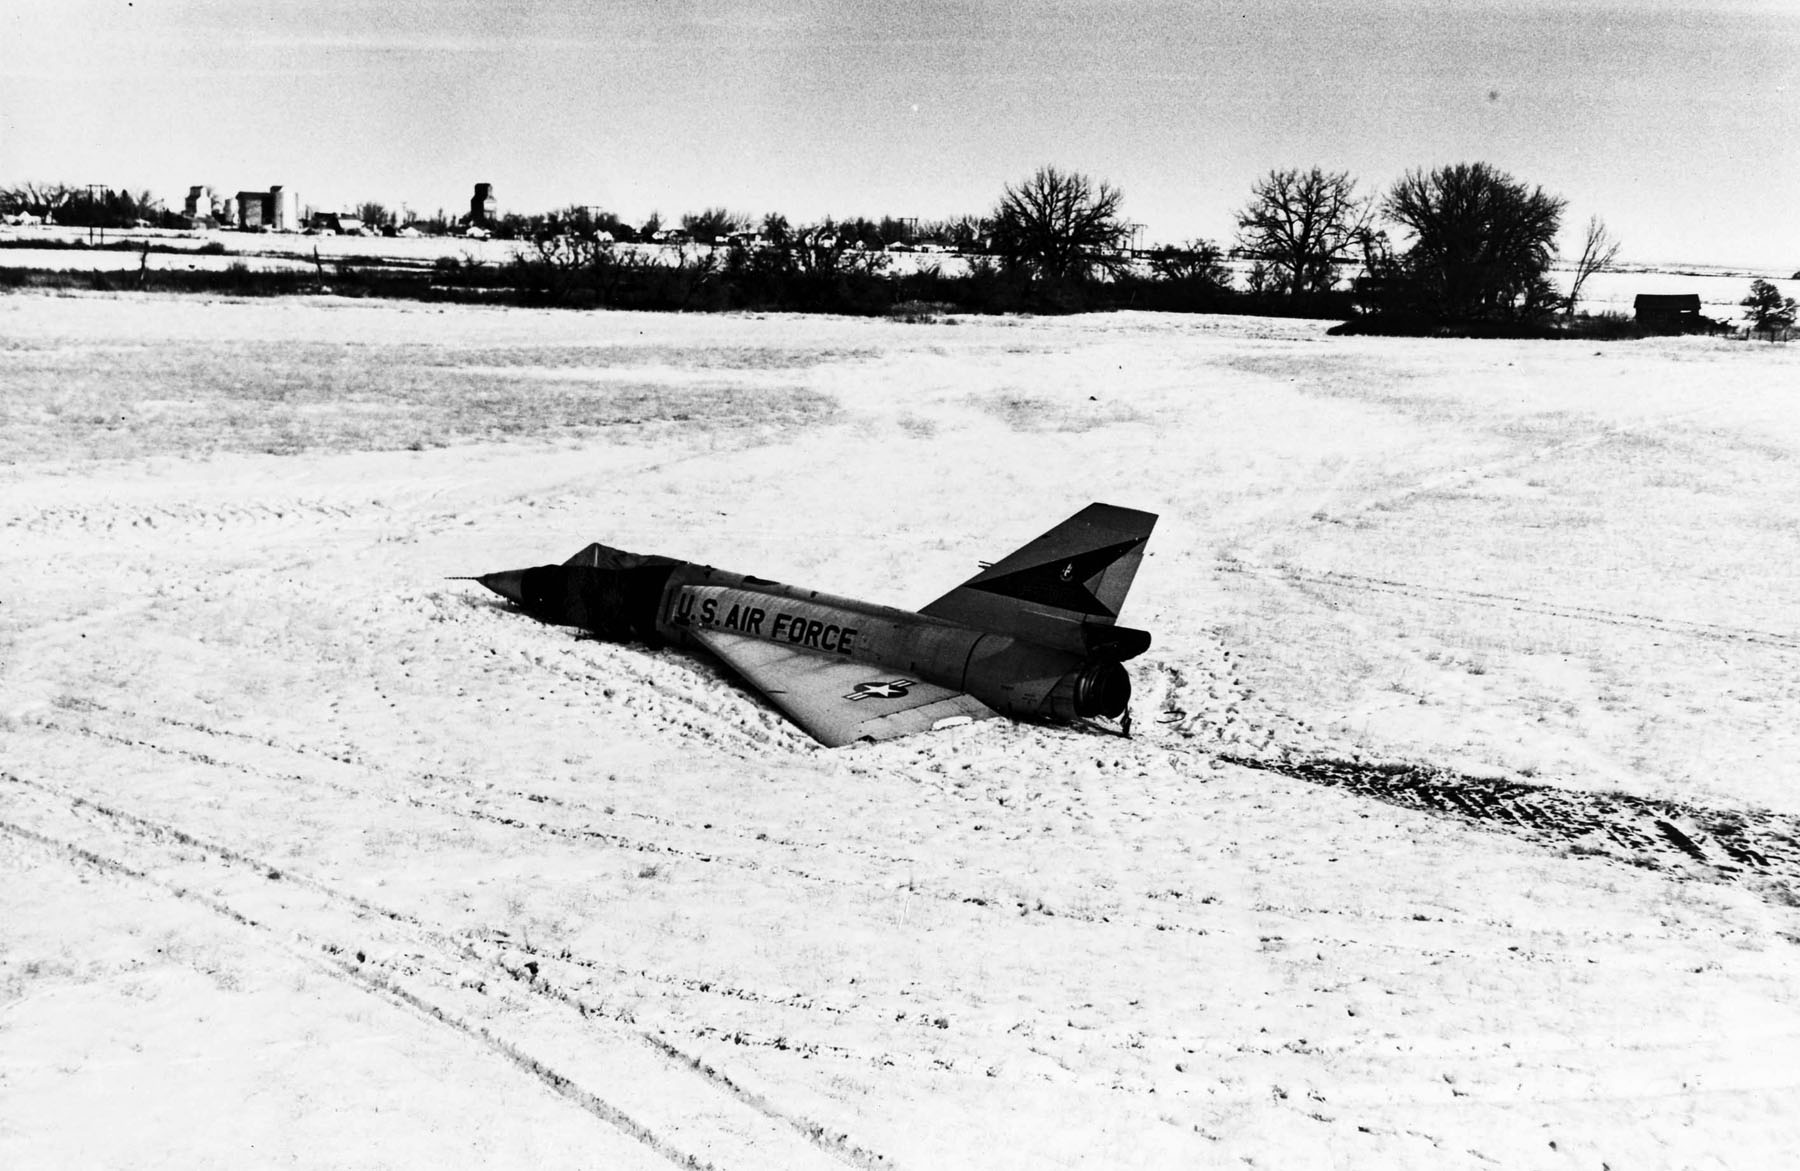 This F-106A (S/N 58-0787) was involved in an unusual incident. During a training mission, it entered an flat spin forcing the pilot to eject. Unpiloted, the aircraft recovered on its own and miraculously made a gentle belly landing in a snow-covered field. (U.S. Air Force photo)